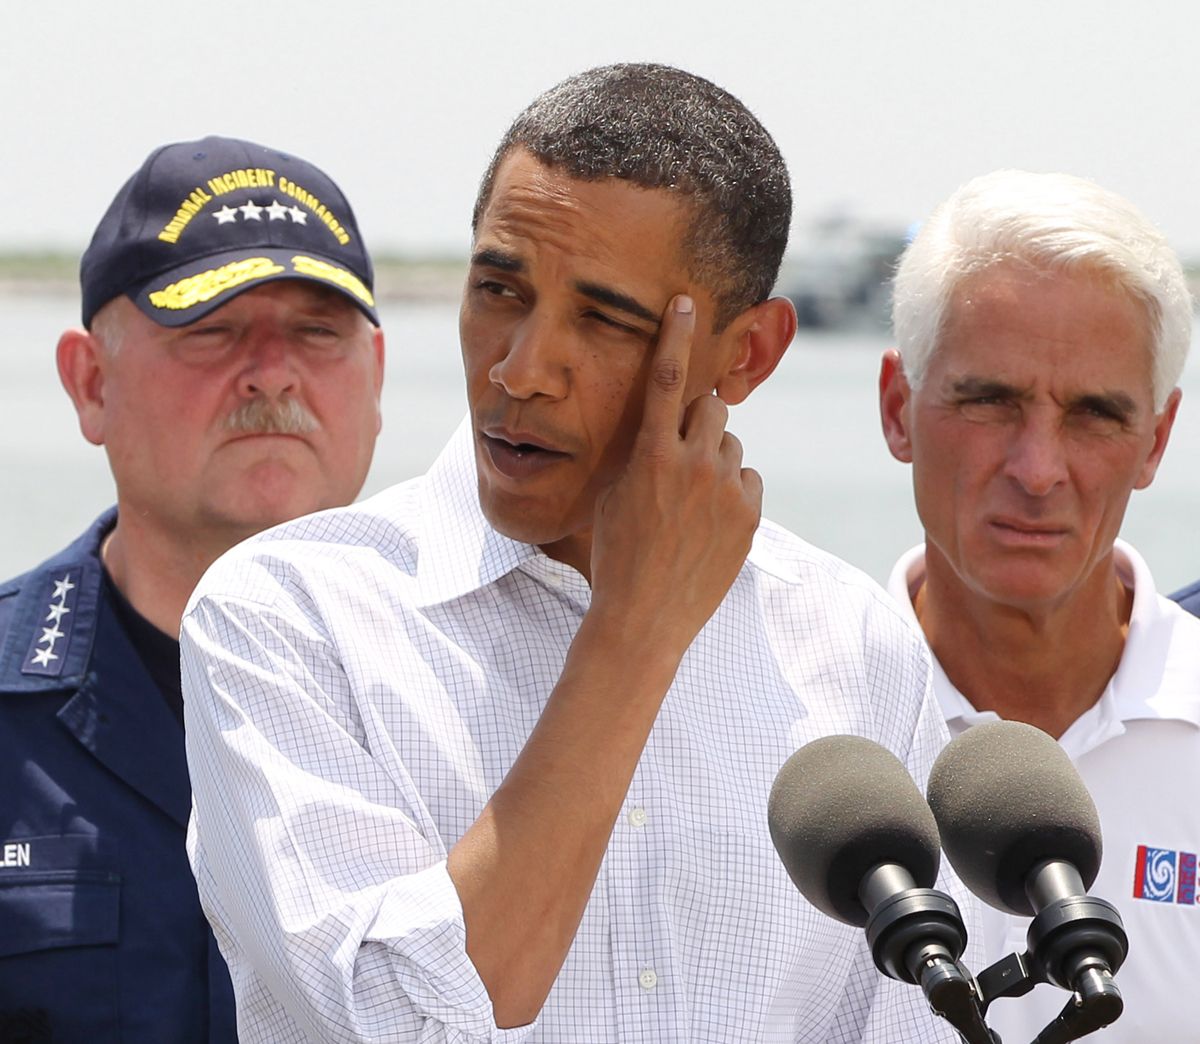 U.S. President Barack Obama speaks after a briefing on the damage along the Louisiana coastline caused after a BP oil line ruptured in the Gulf of Mexico, May 28, 2010. (From L-R) National Incident Commander U.S. Coast Guard Adm. Thad Allen , Obama, and Florida Gov. Charlie Crist.  REUTERS/Larry Downing  (UNITED STATES - Tags: POLITICS)     (Â© Larry Downing / Reuters)